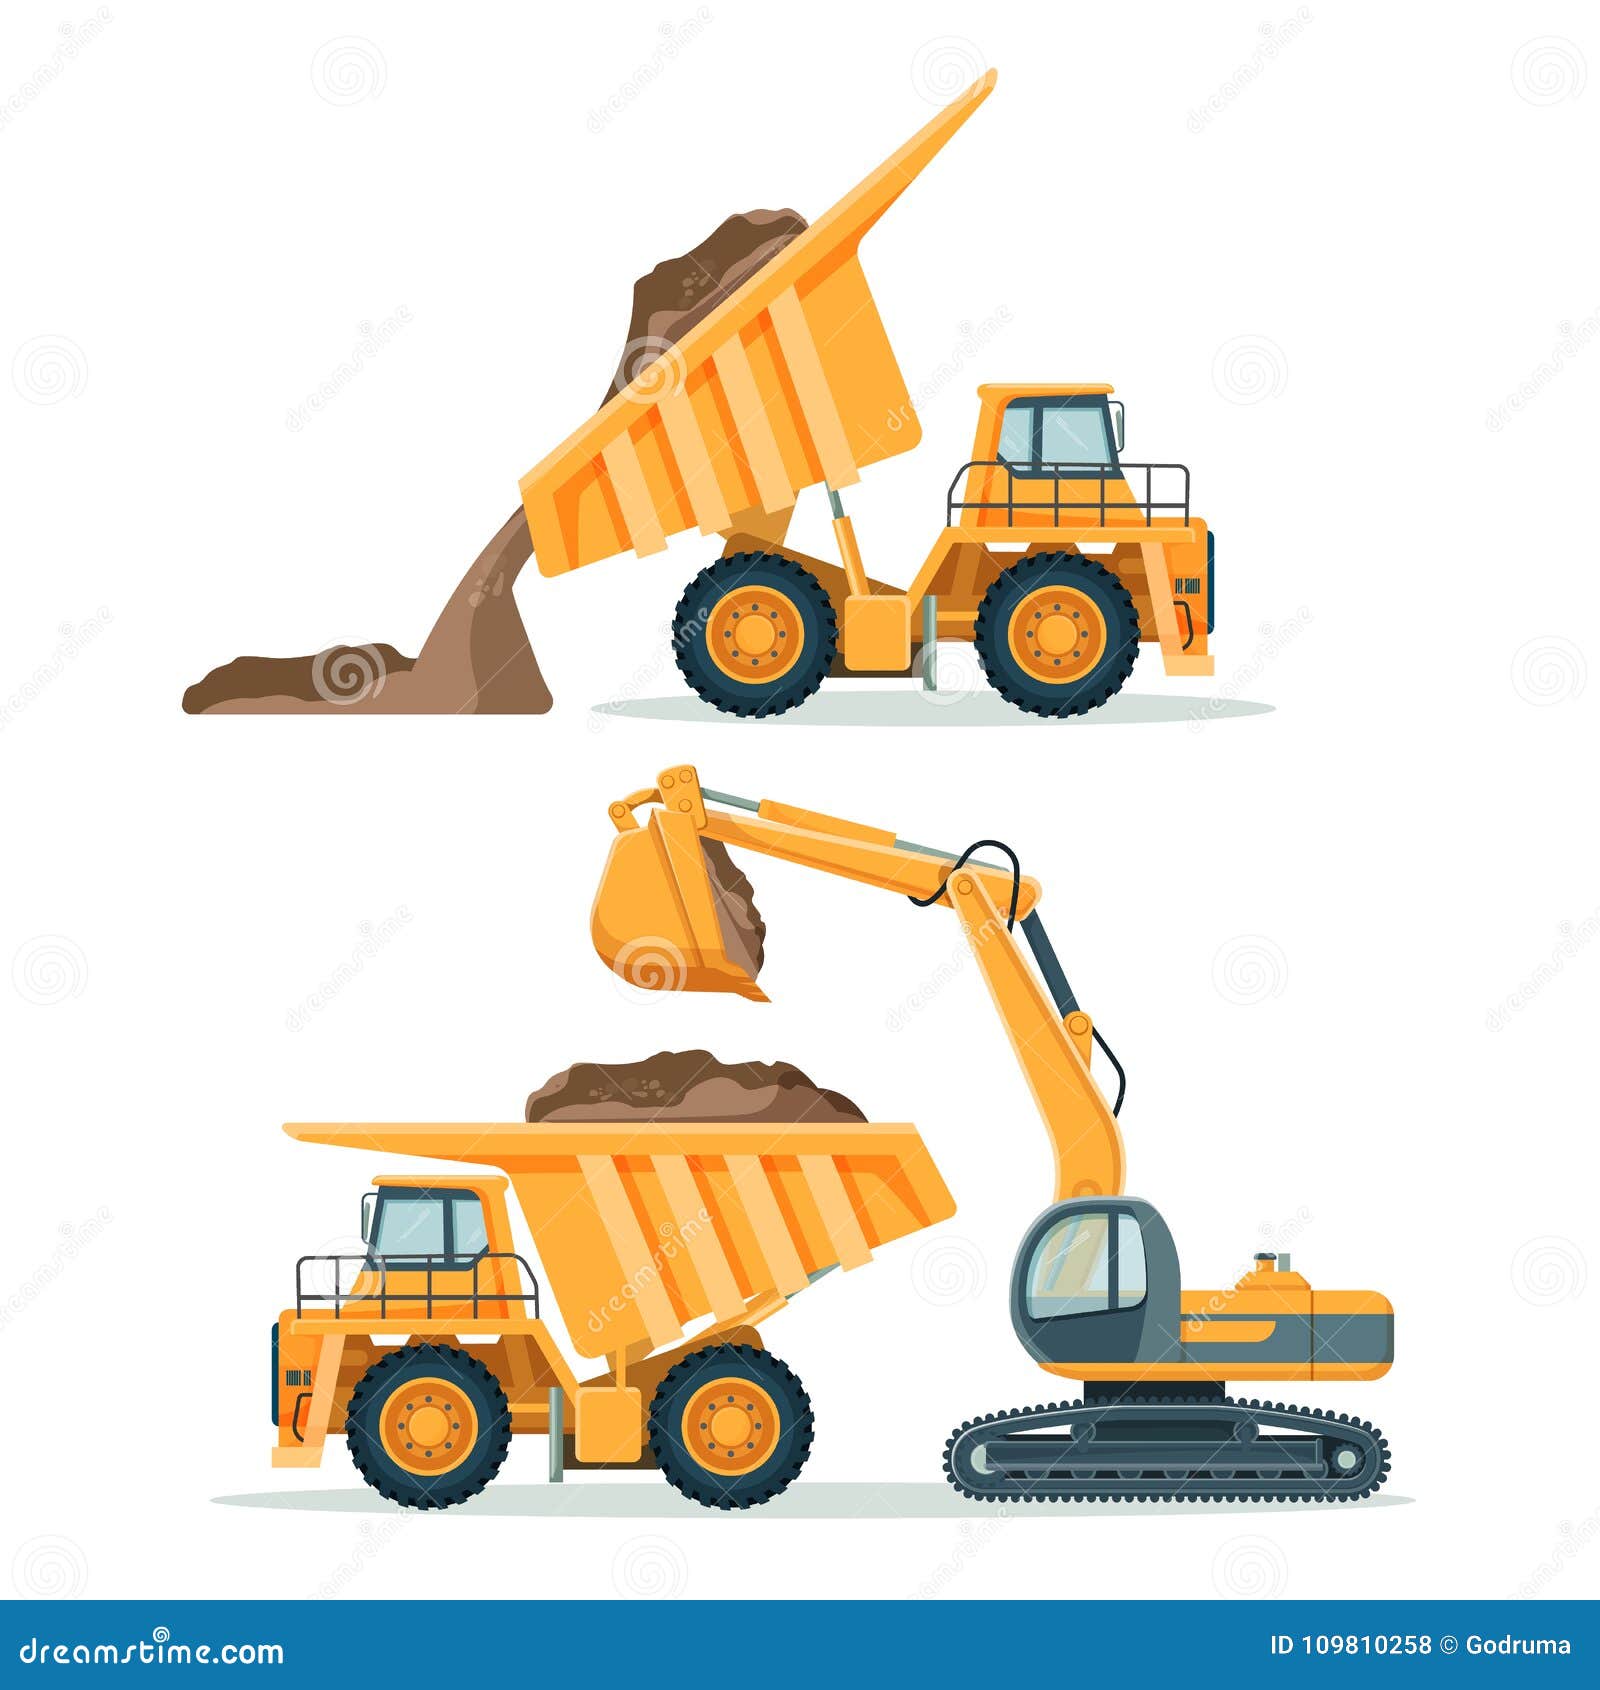 dump truck with body full of soil and modern excavator